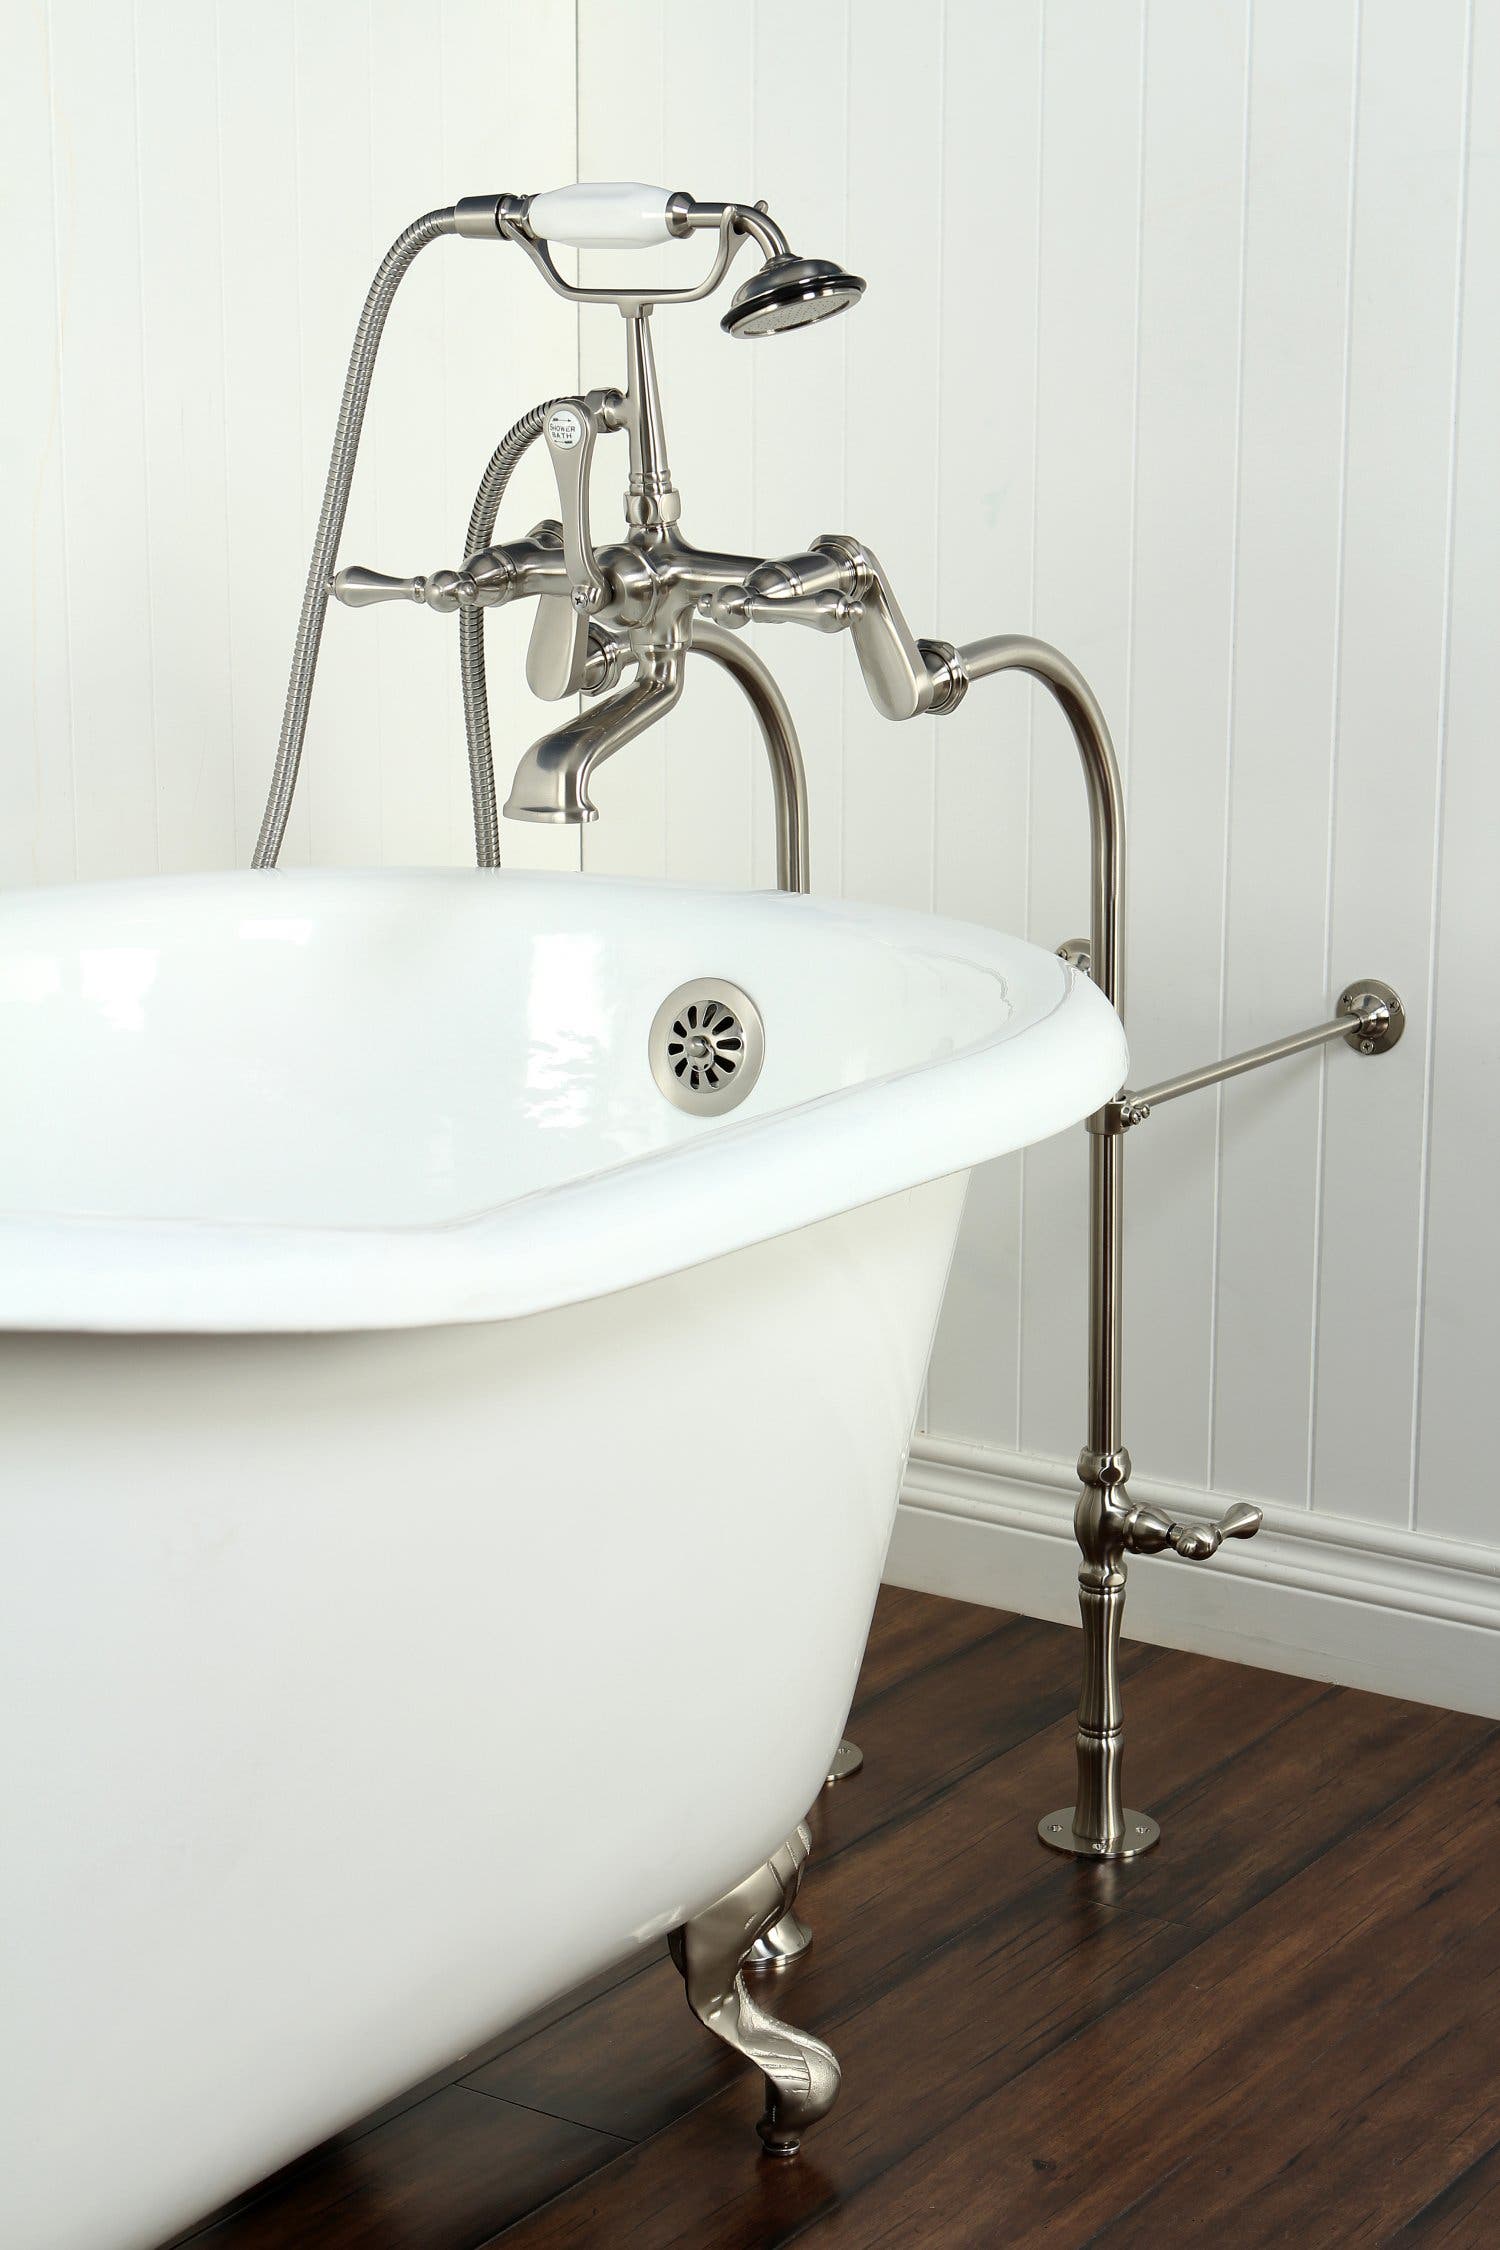 Product Set Feature 2: The Profile of the CCK103T8 Tub Filler Package